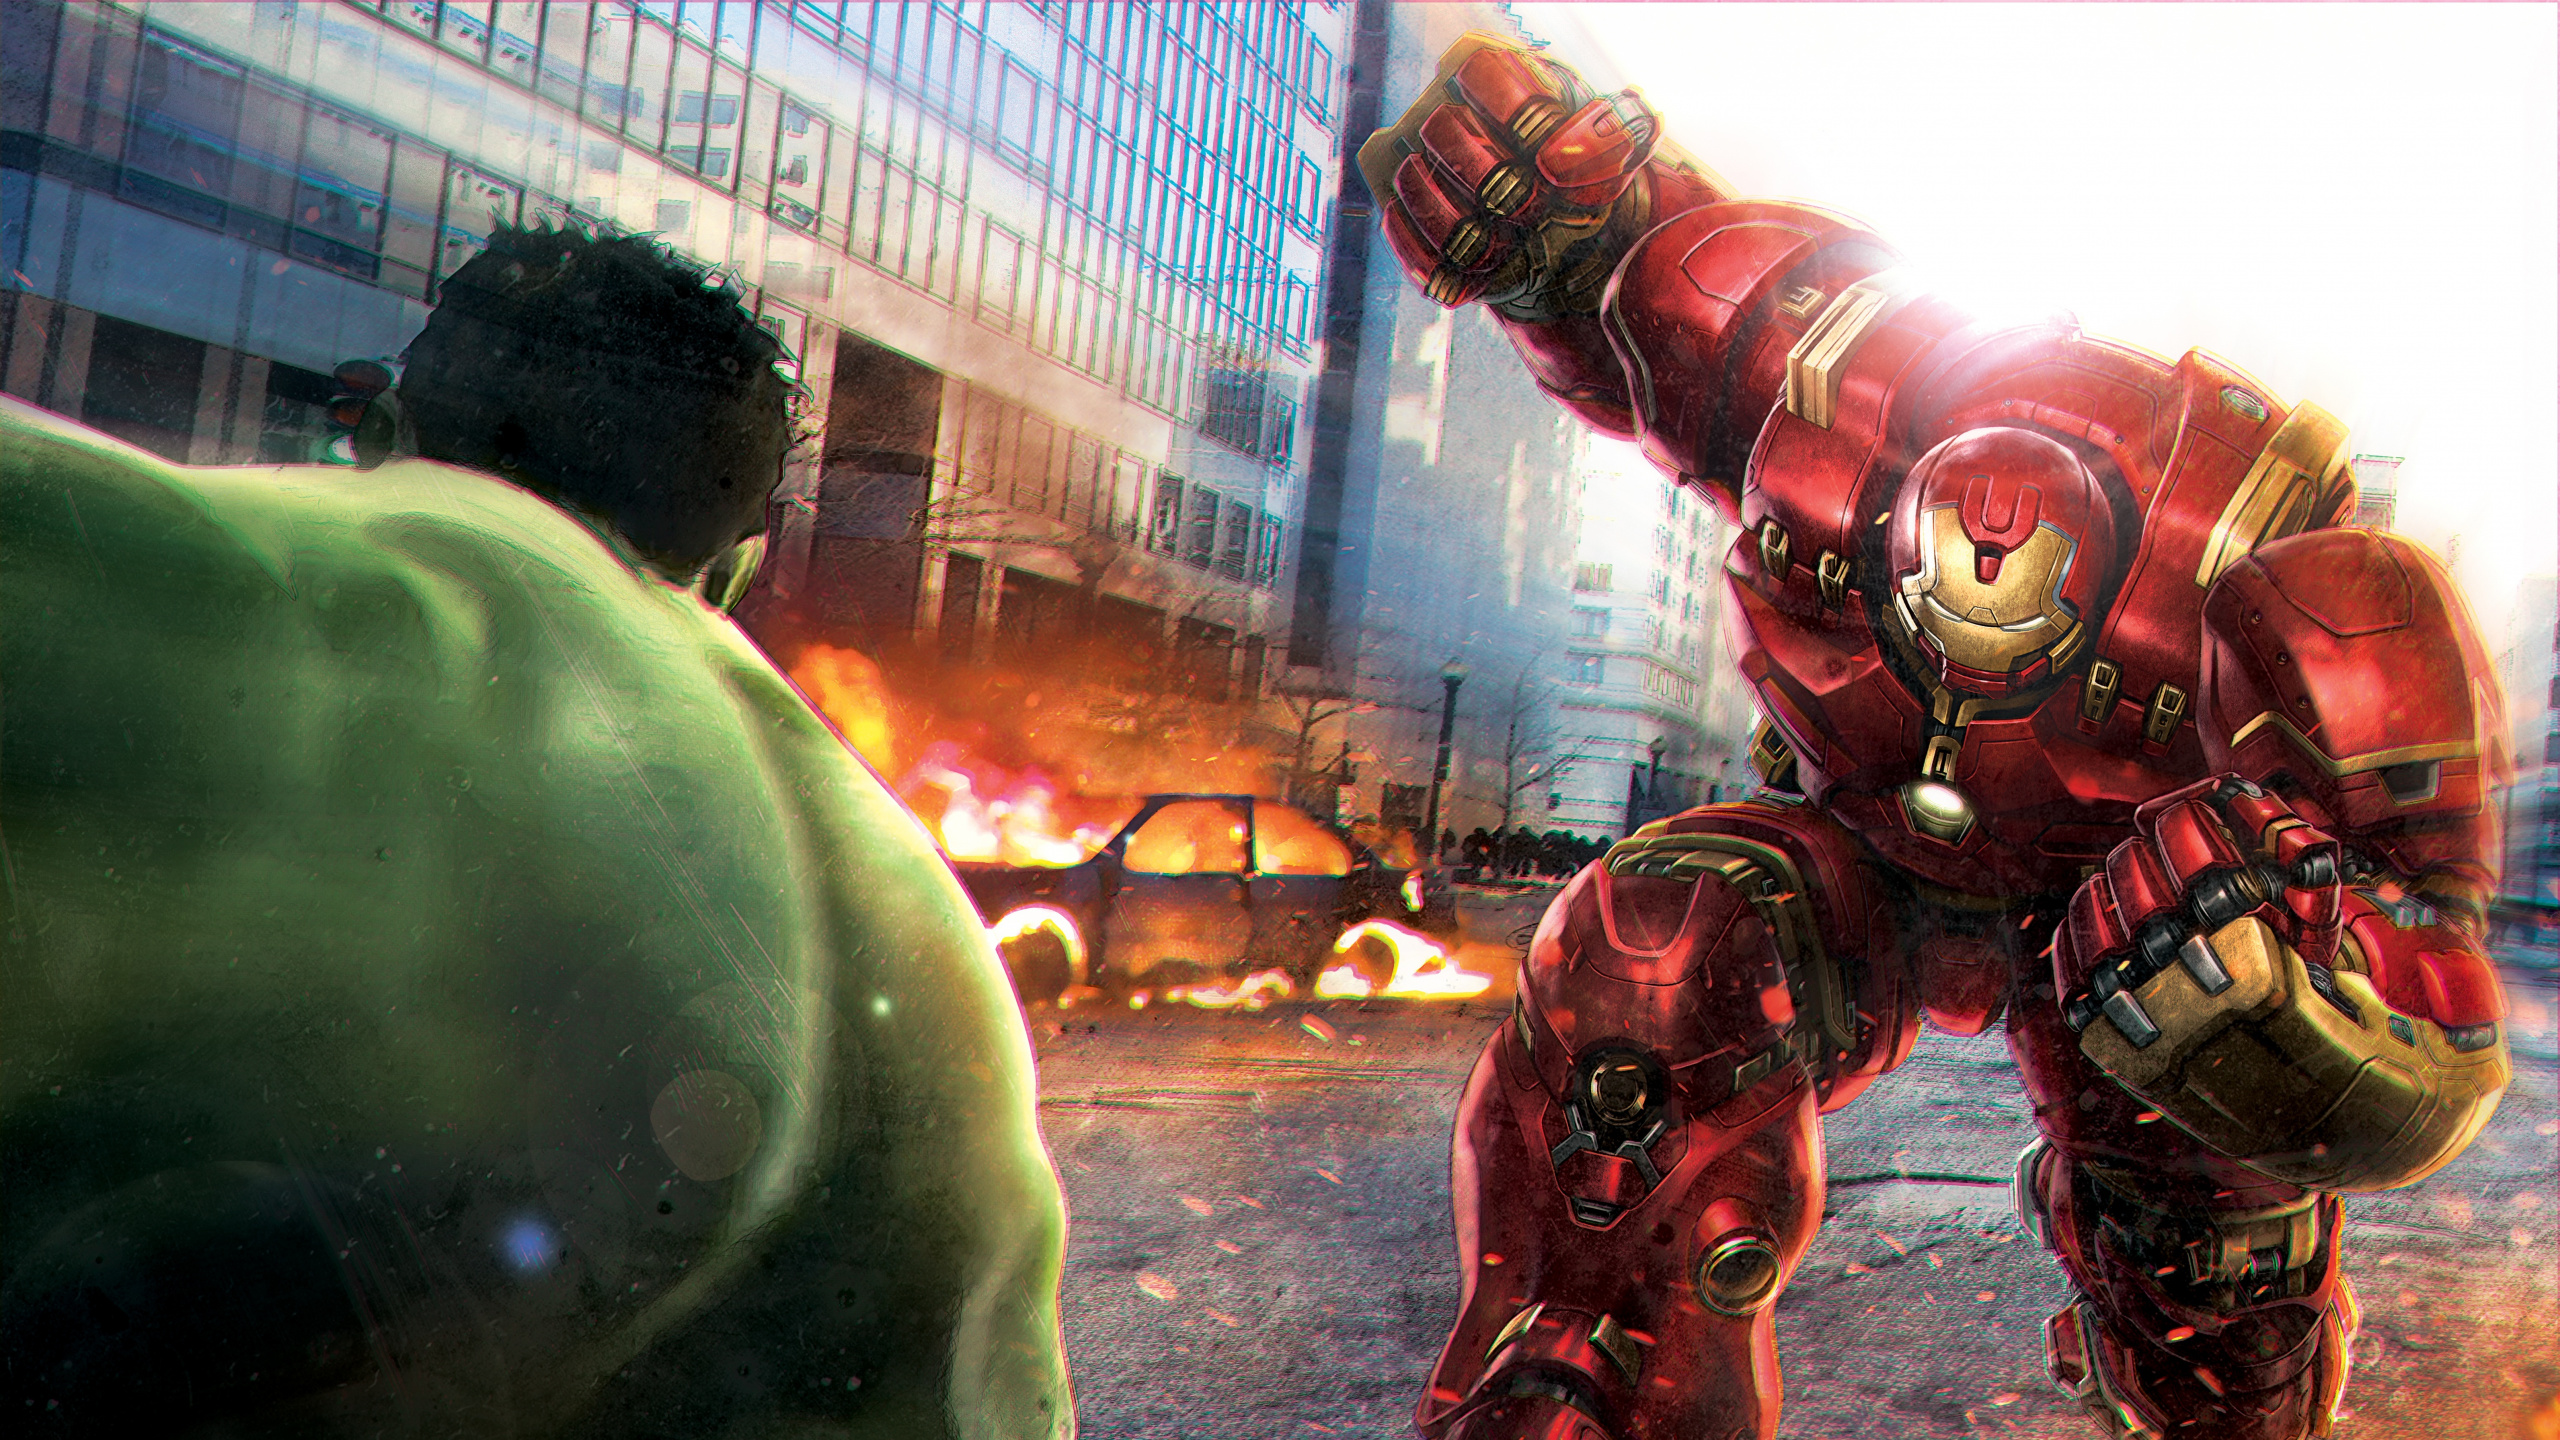 Green and Red Robot Painting. Wallpaper in 2560x1440 Resolution